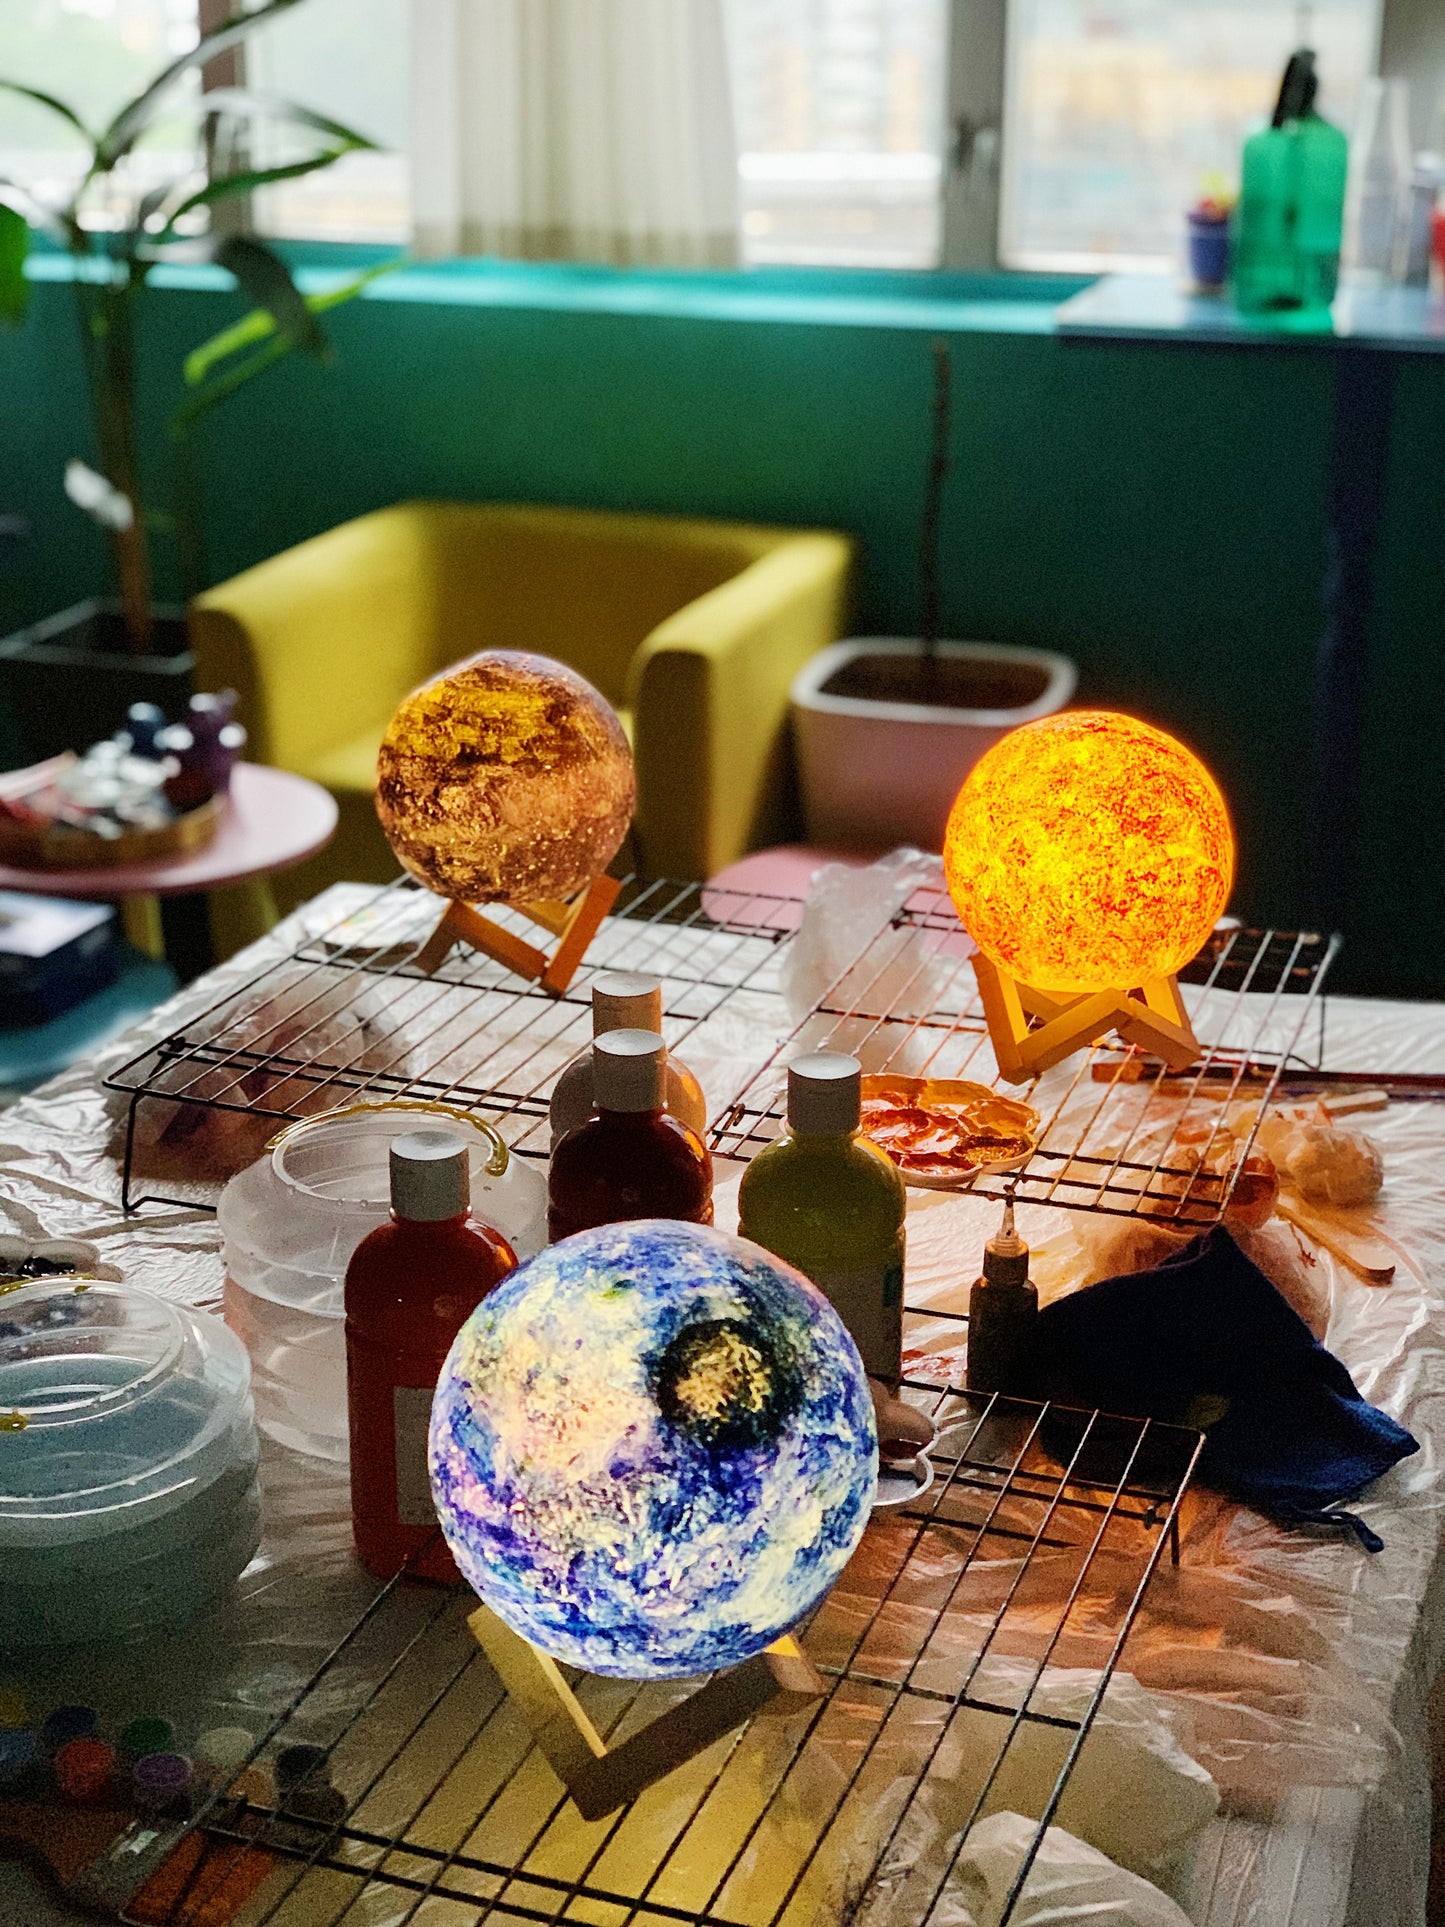 Professional color analysis combined with hand-painted moon lamp workshop